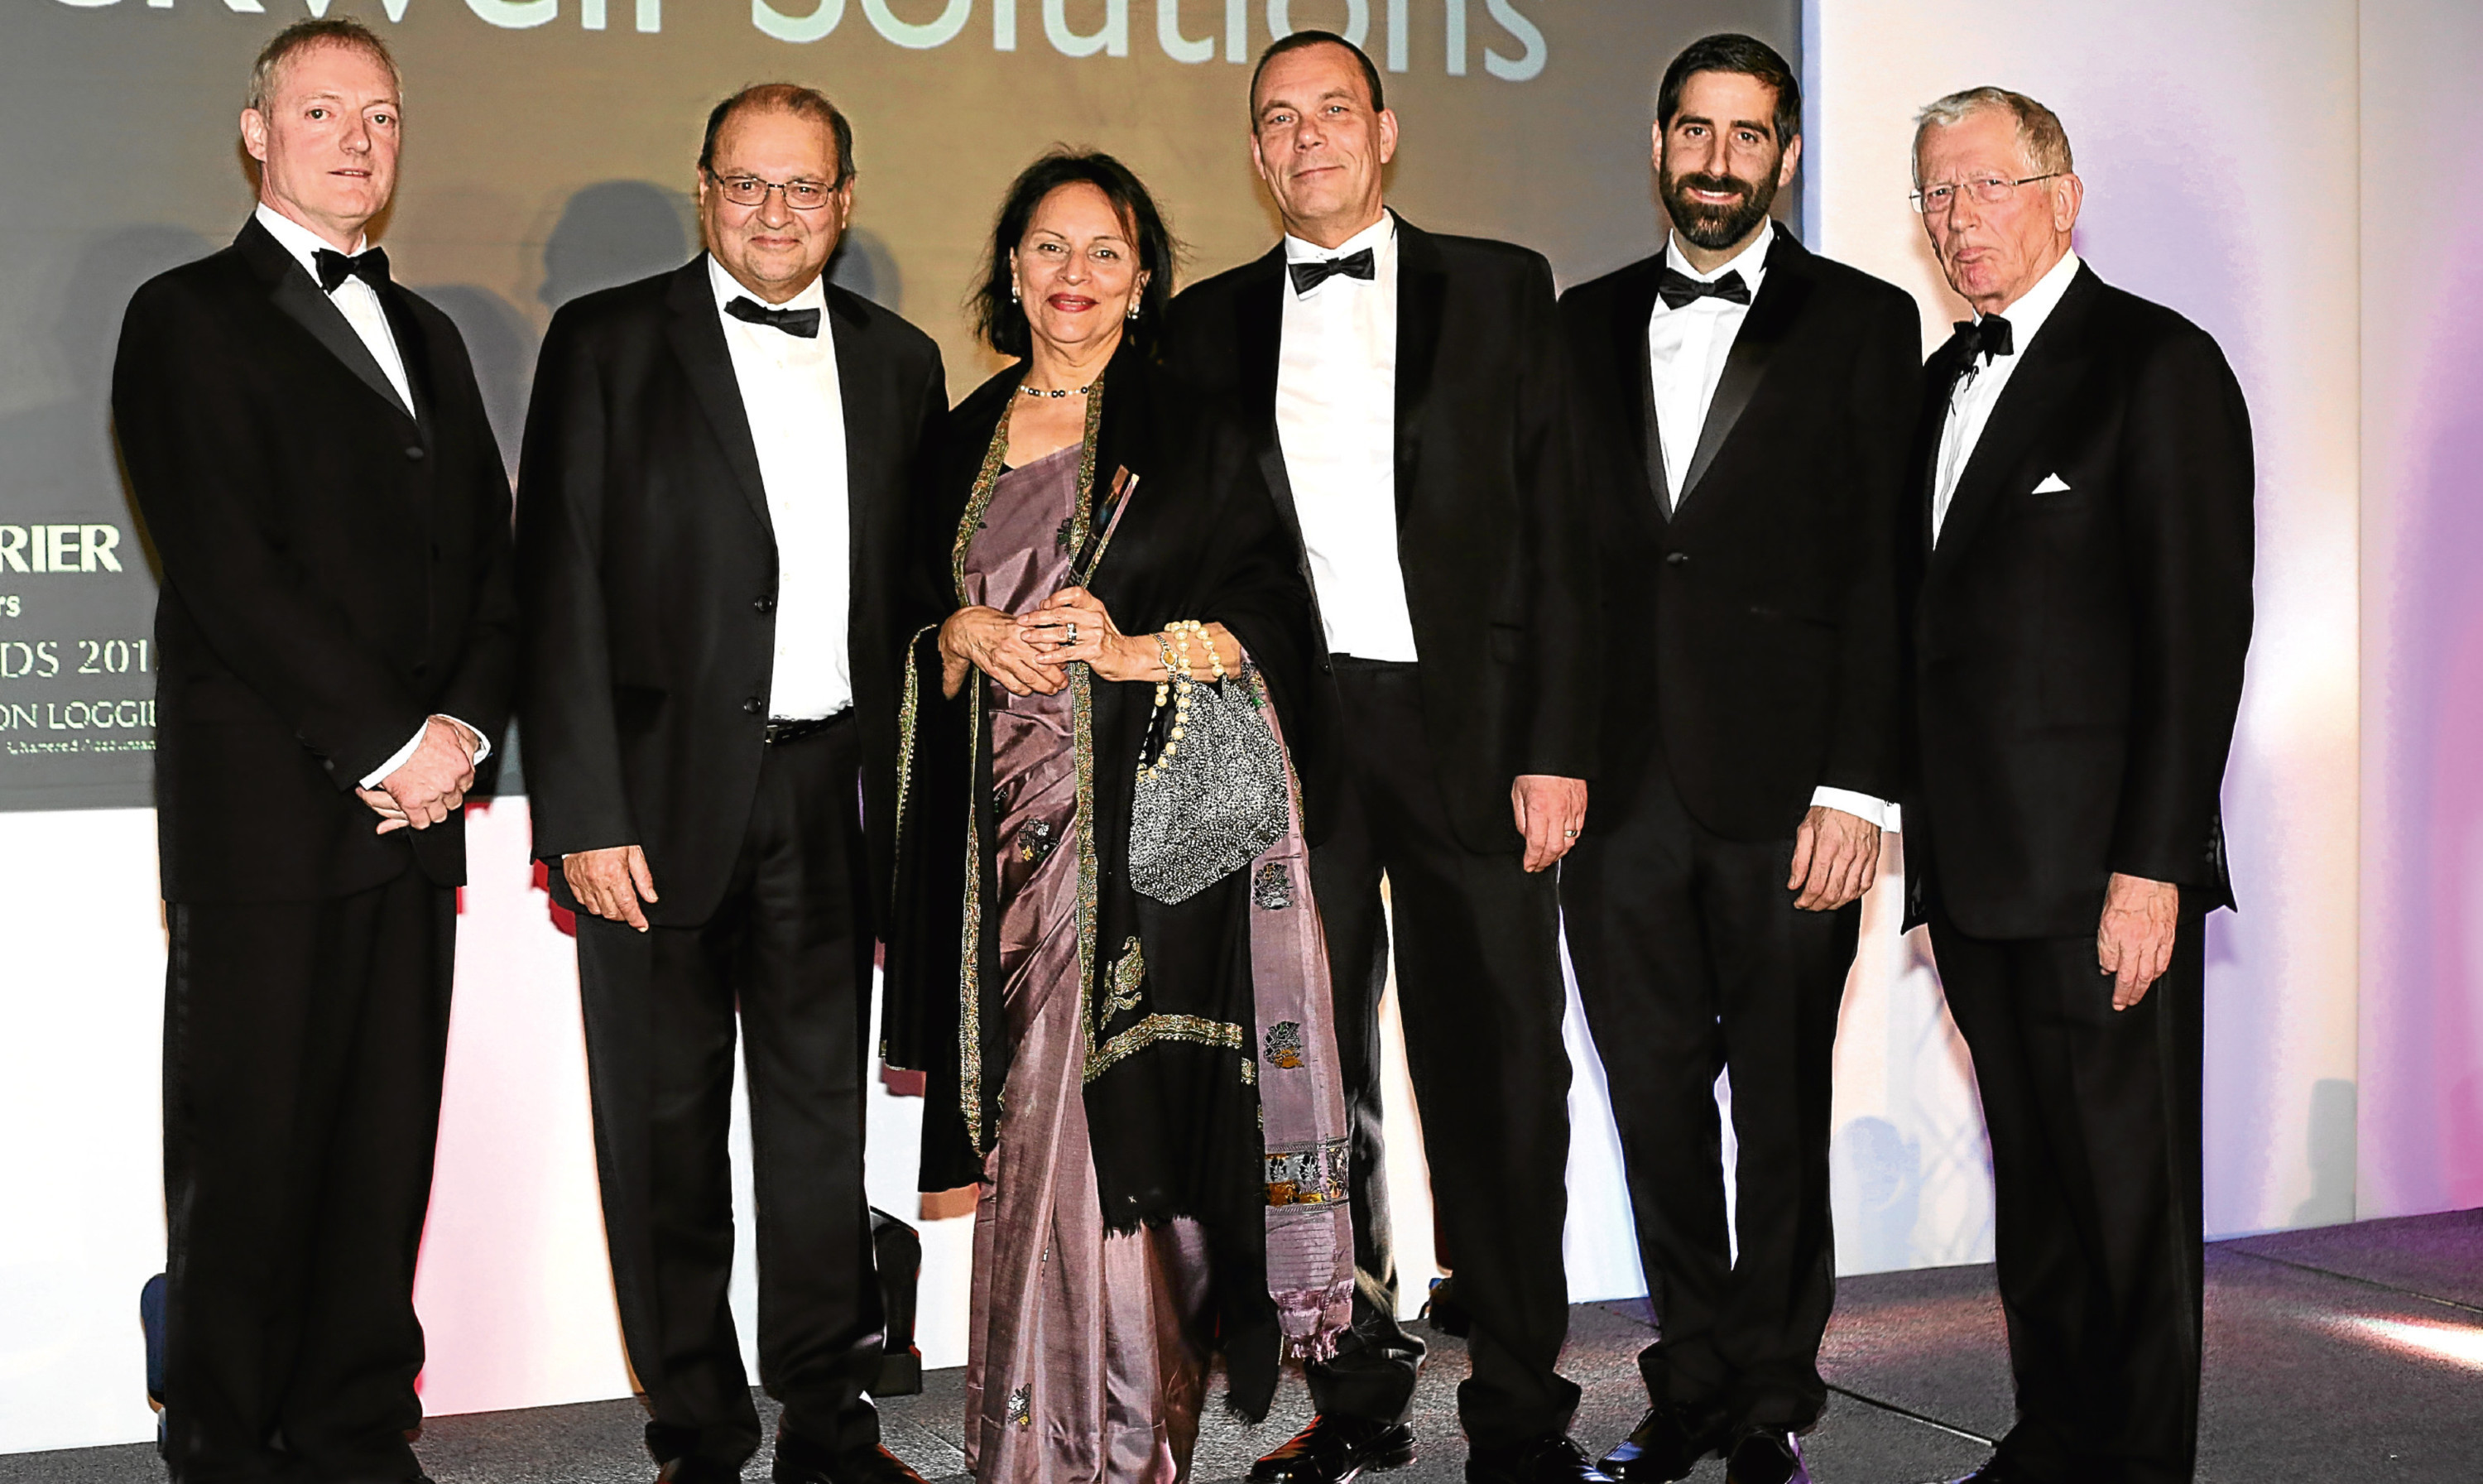 Rockwell Solutions scooped the family business prize in 2014 before returning last year to take the manufacturing award